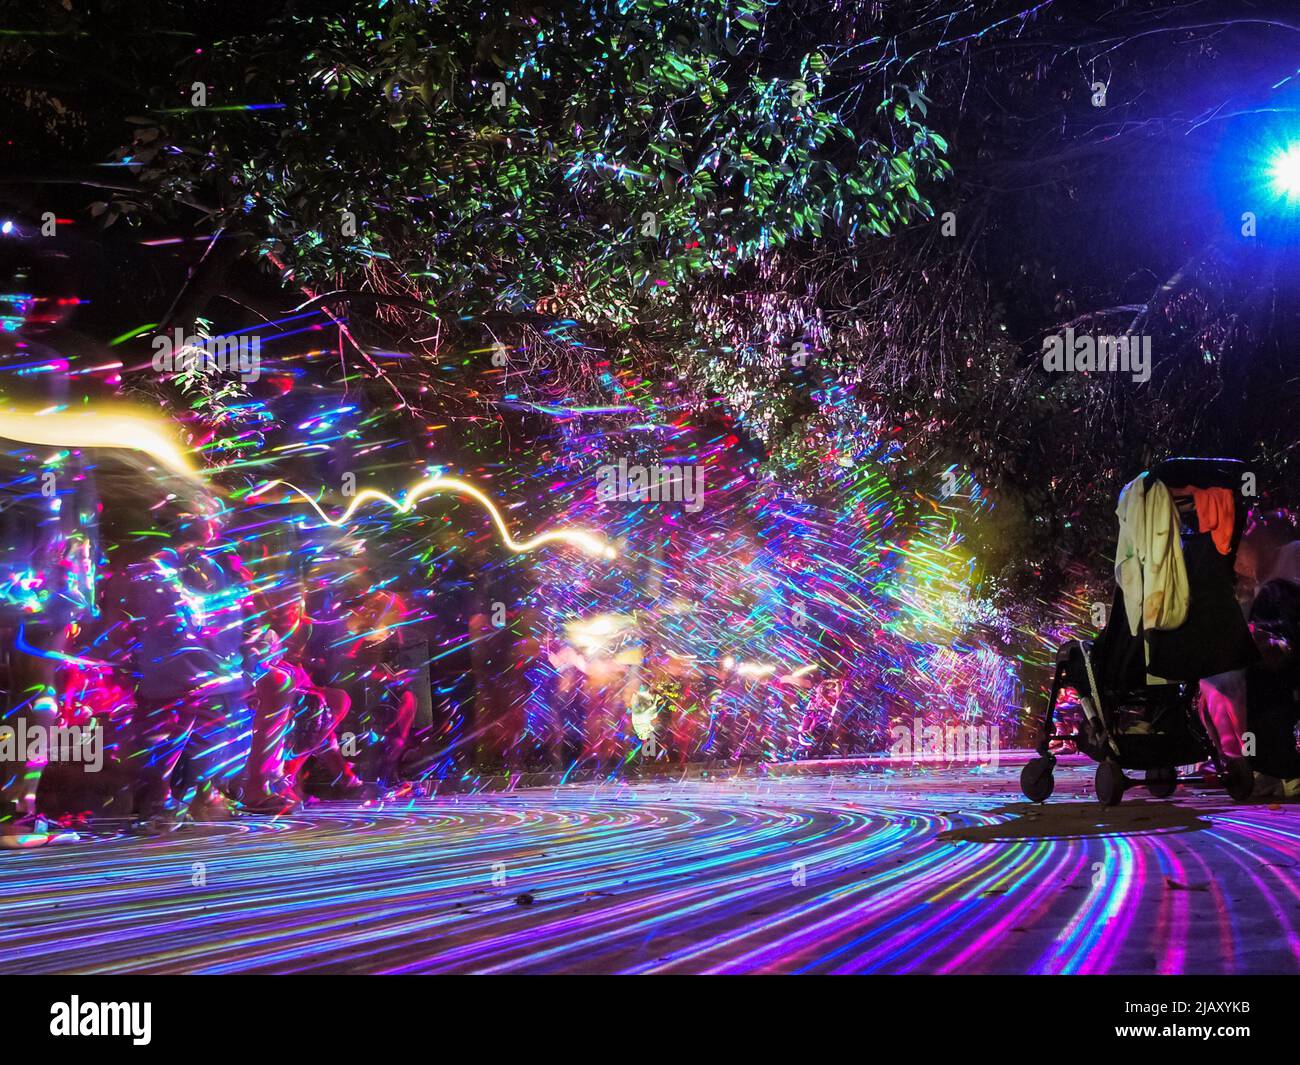 Bright multi-colored lines glow on the alley in the night park creating pattern on the defocused background of people walking. Play of light and shado Stock Photo